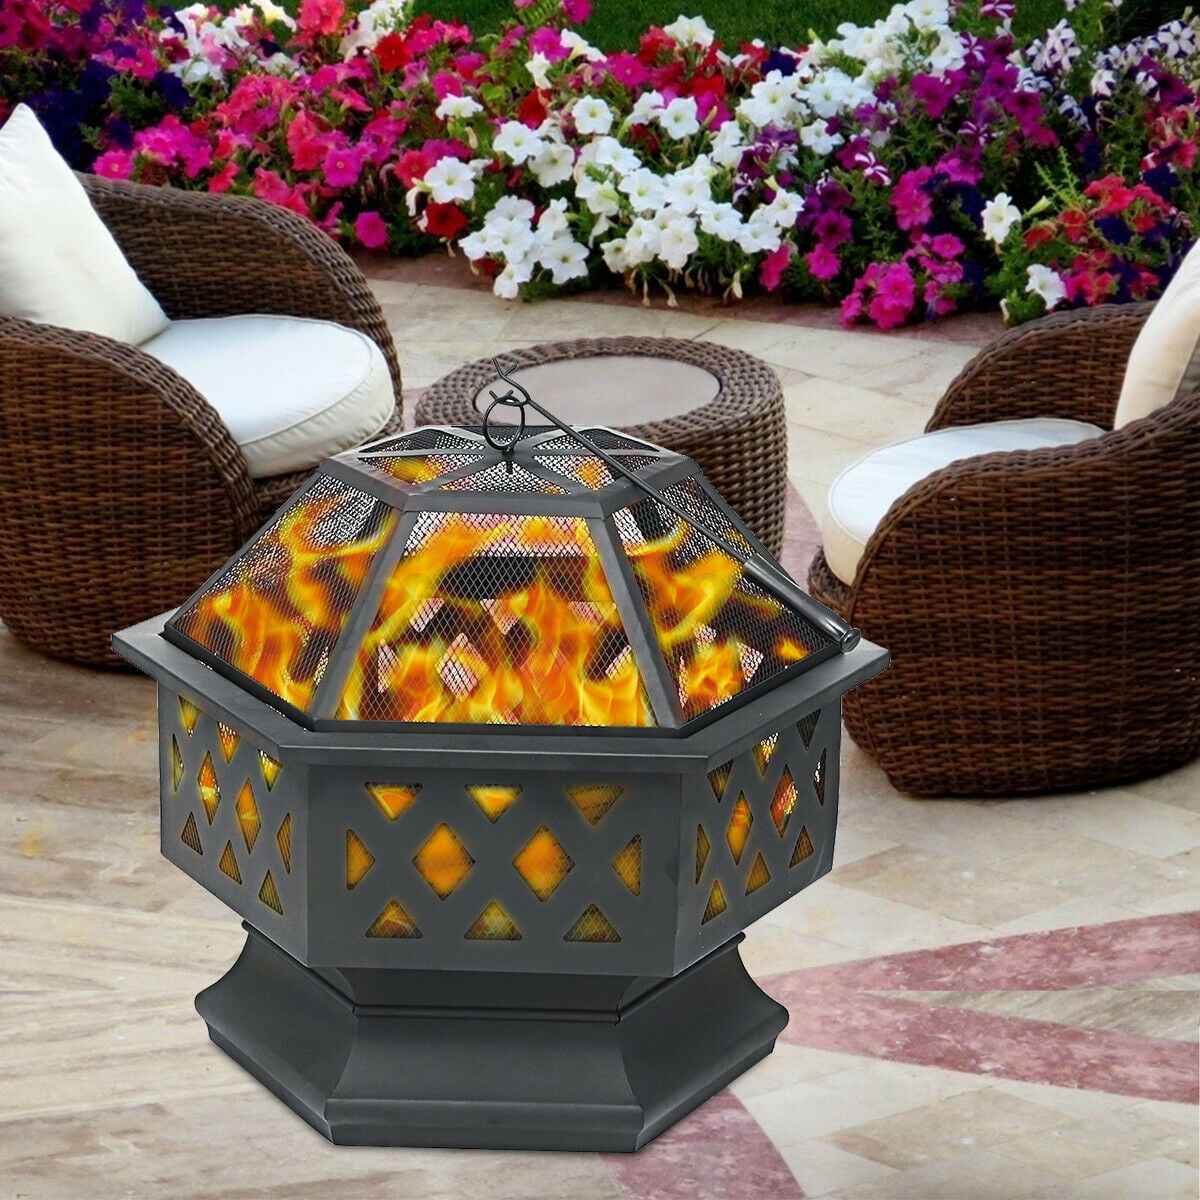 Round Shaped Patio Fire Pit Outdoor Home Garden Backyard Firepit Bowl Fireplace 